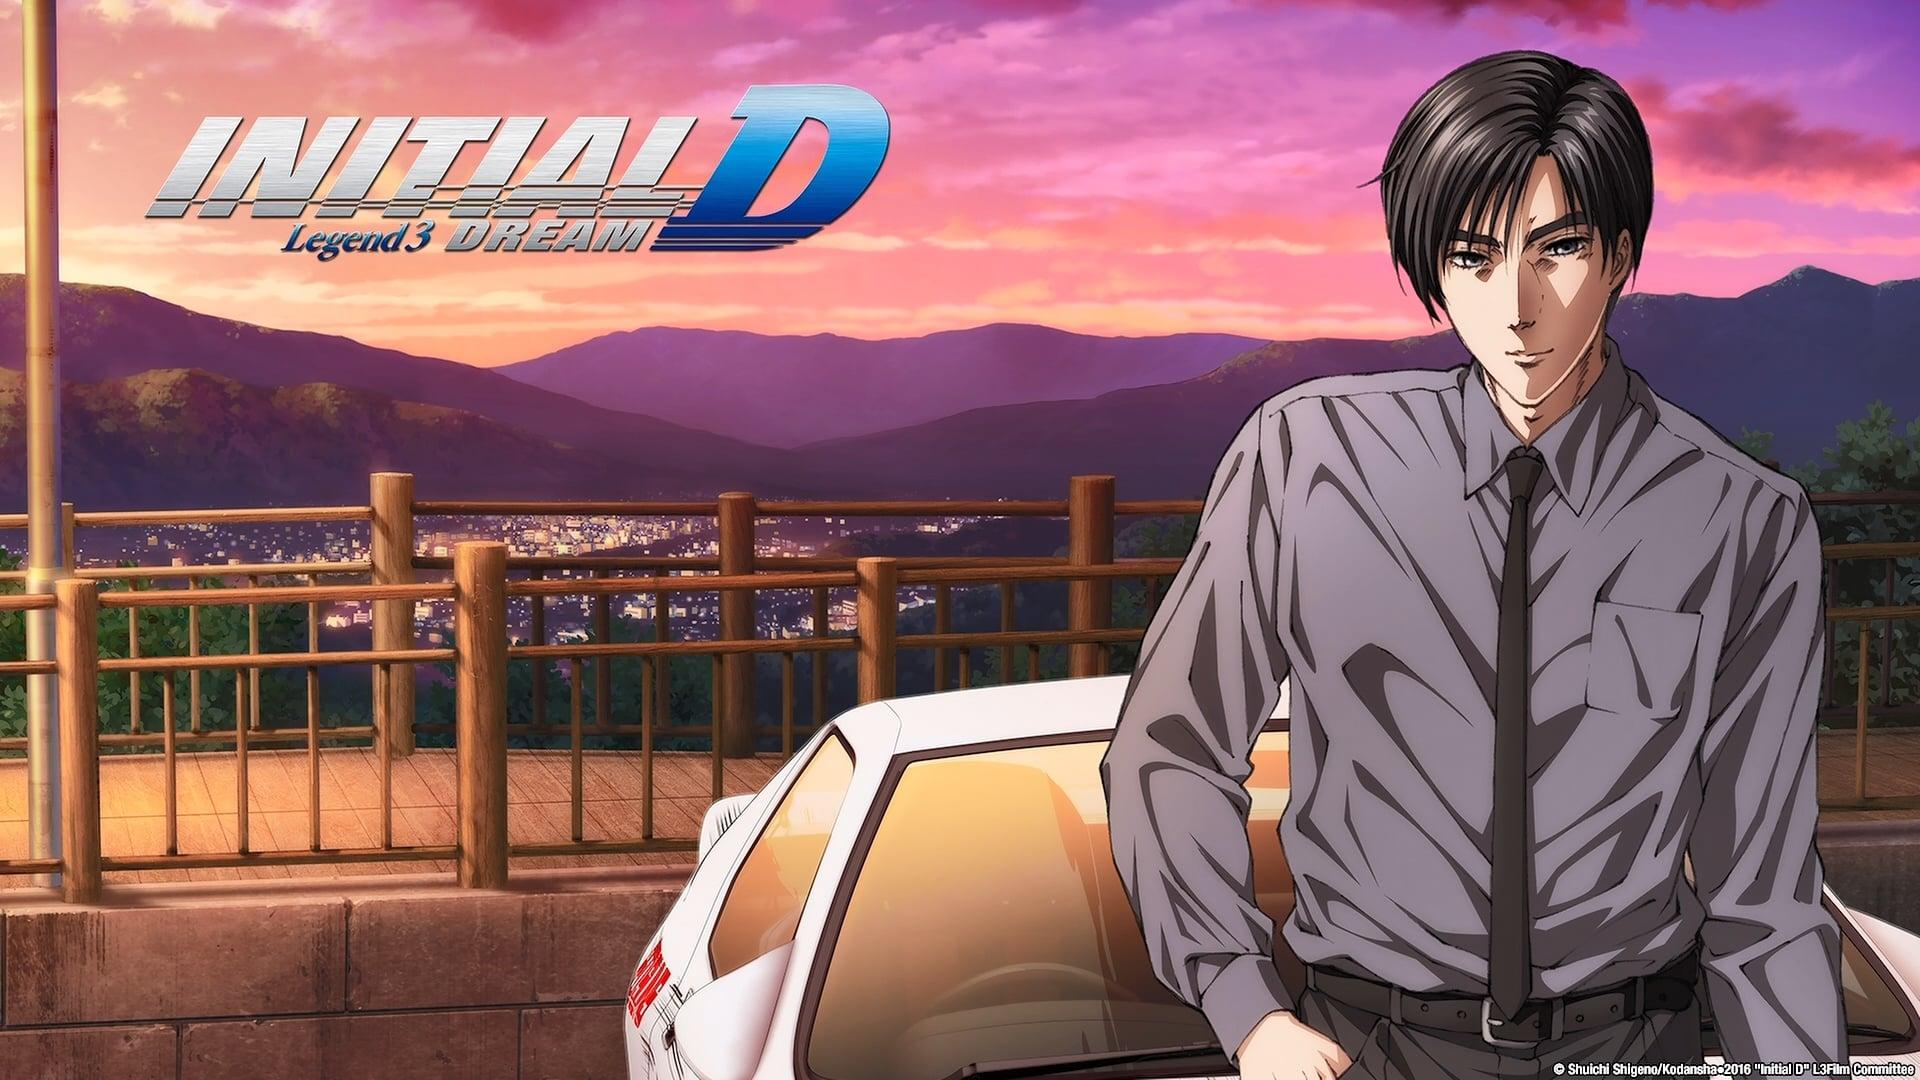 New Initial D the Movie - Legend 3: Dream backdrop